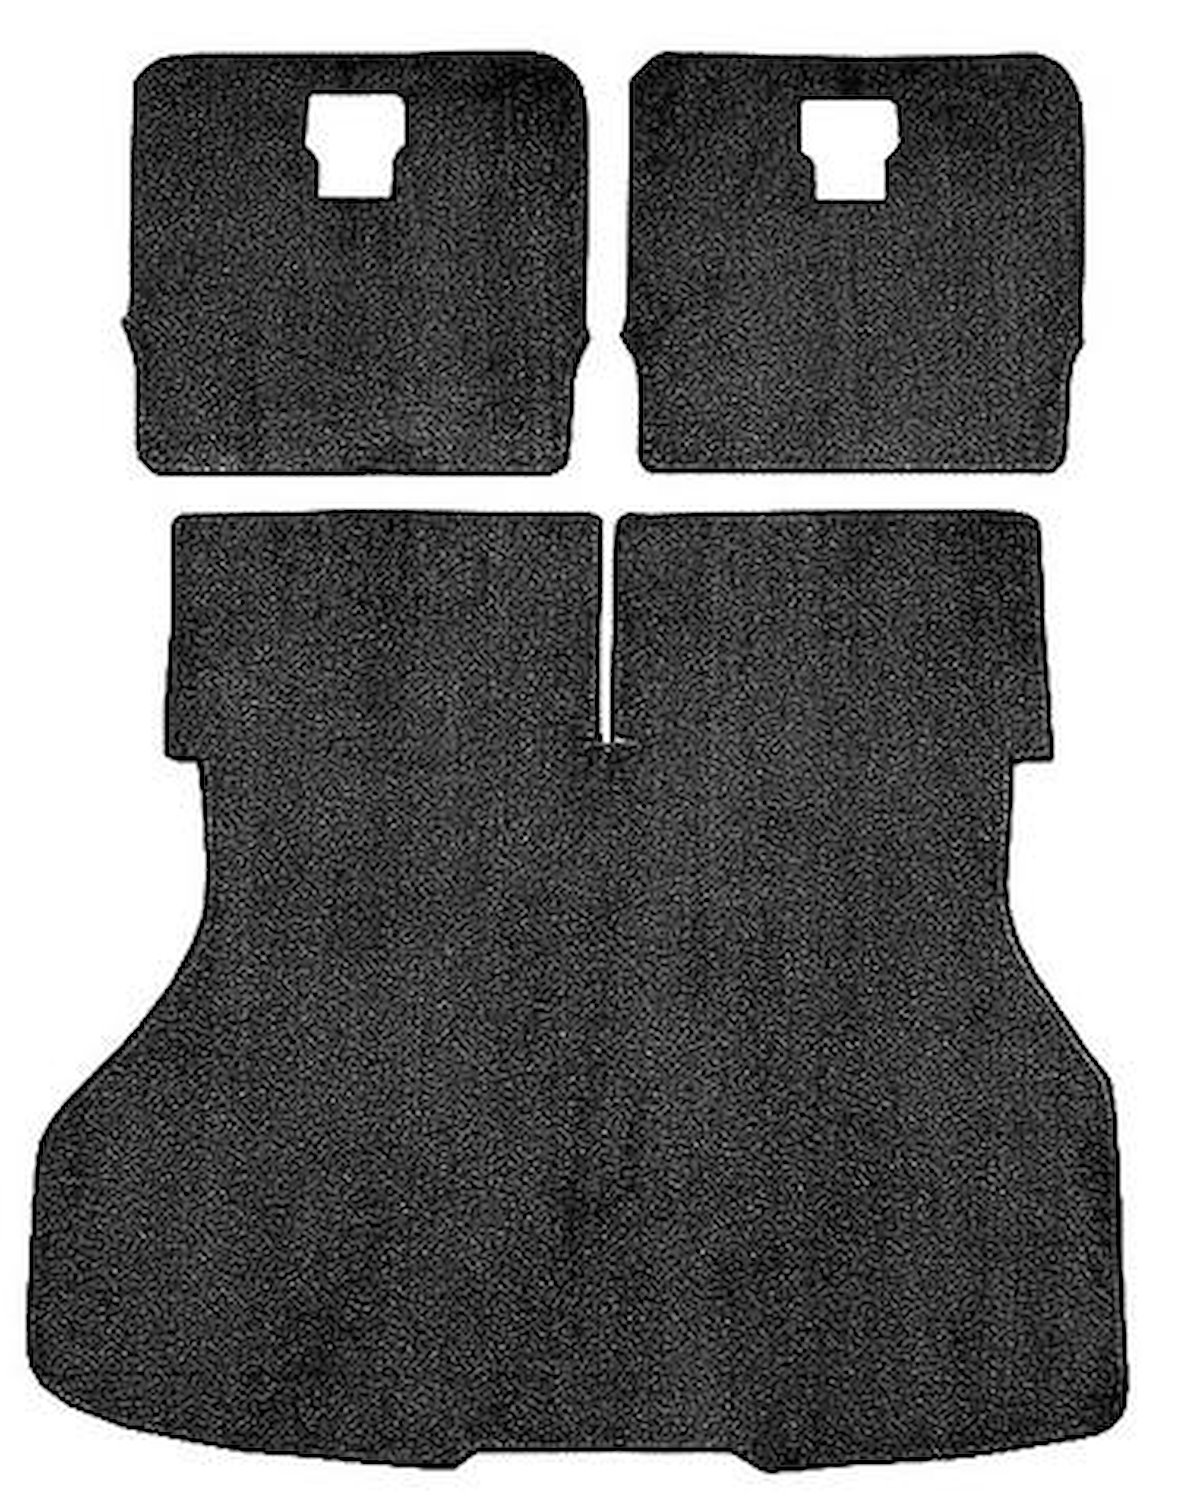 A4024B33 Rear Cargo Area Cut Pile Carpet Set With Mass Backing 1983-86 Mustang; Graphite